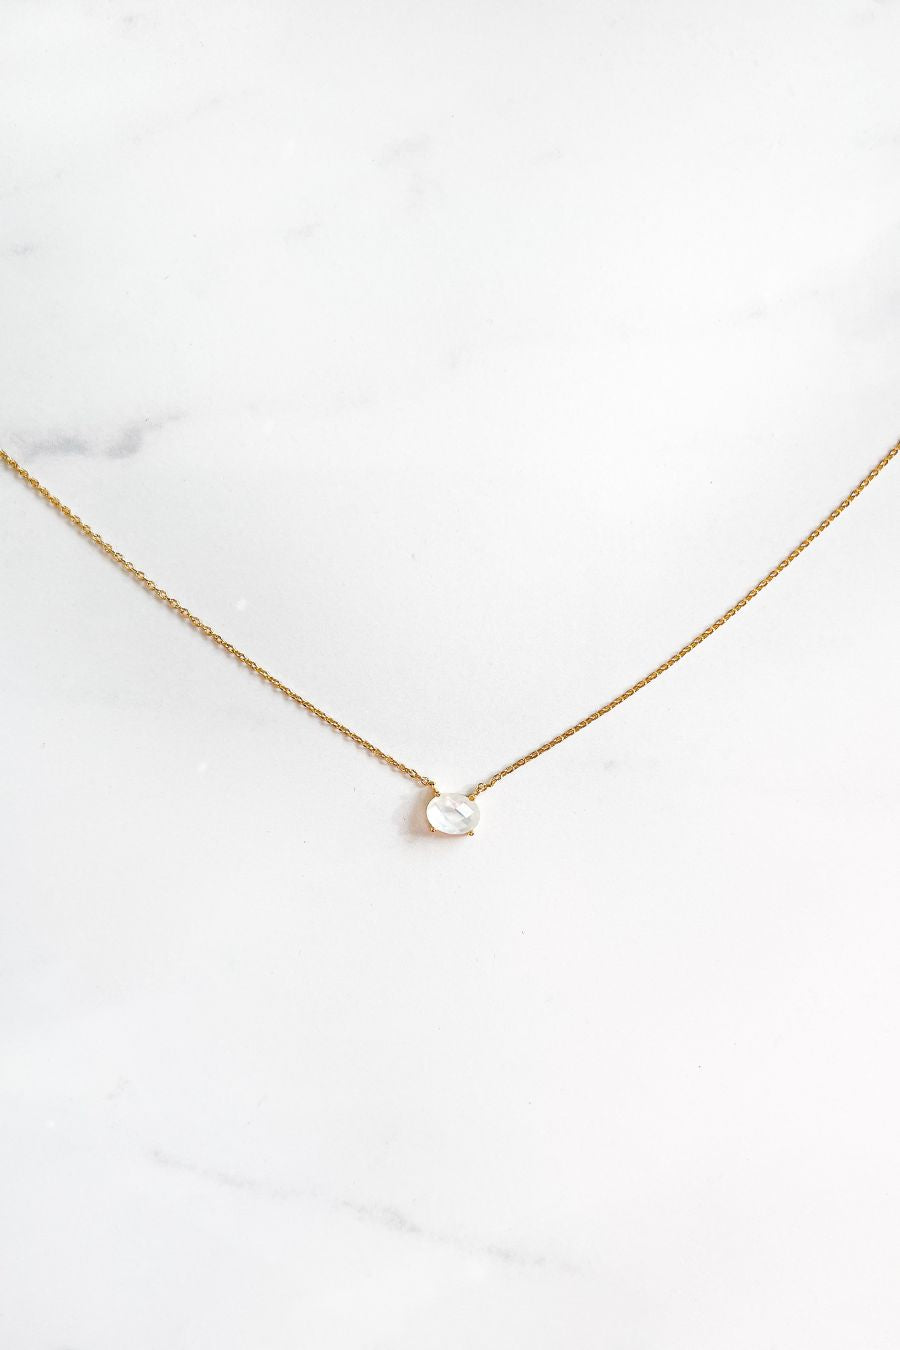 White Oval Dainty Necklace- Gold